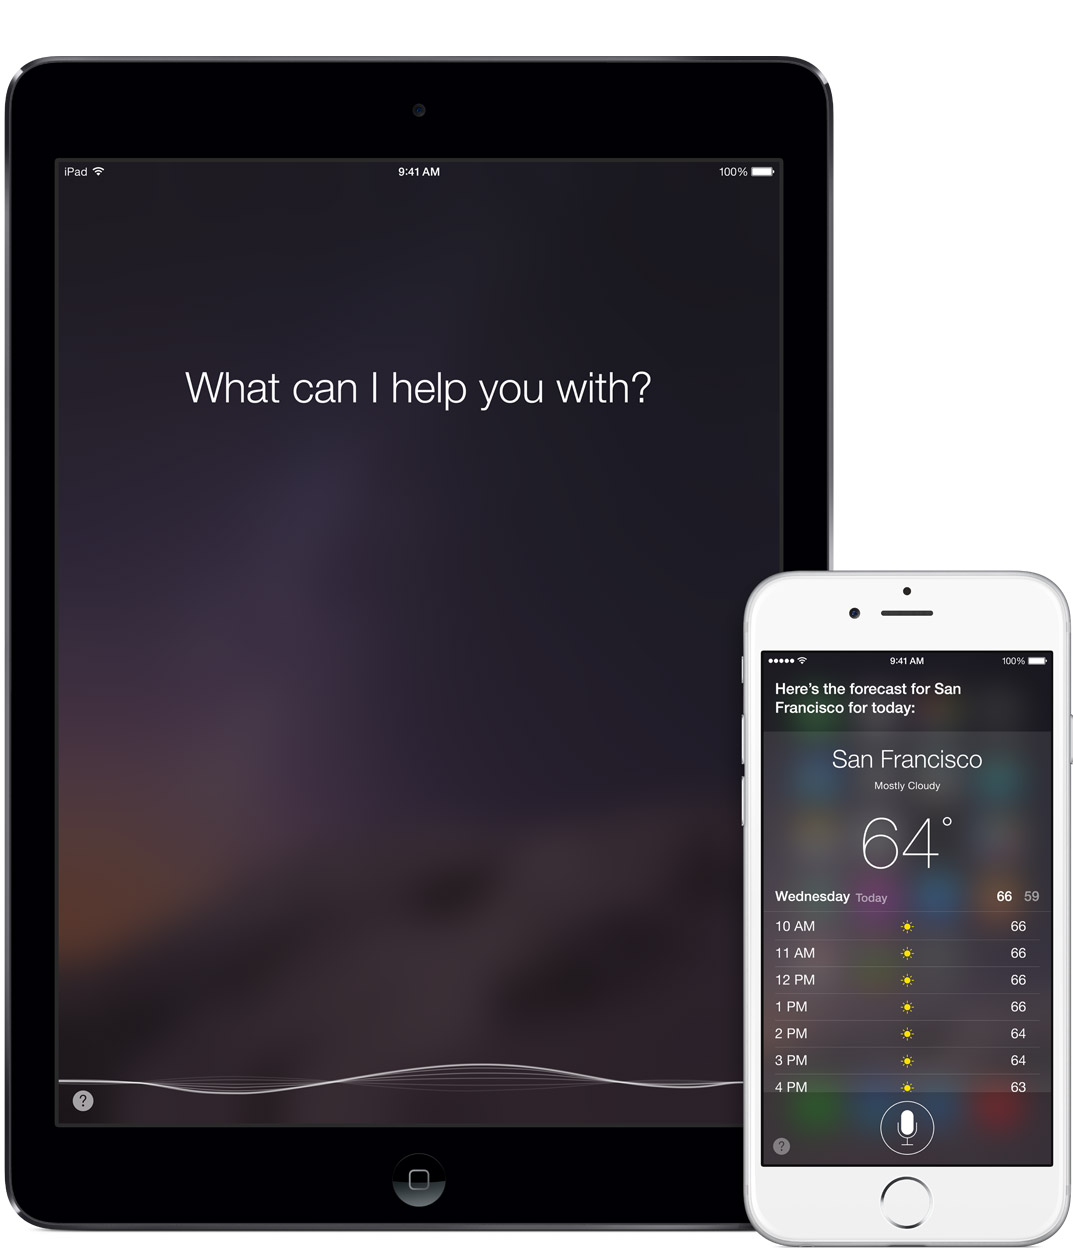 Apple to Release Siri SDK and Works on Speaker Dedicated to Assistant, Website Says